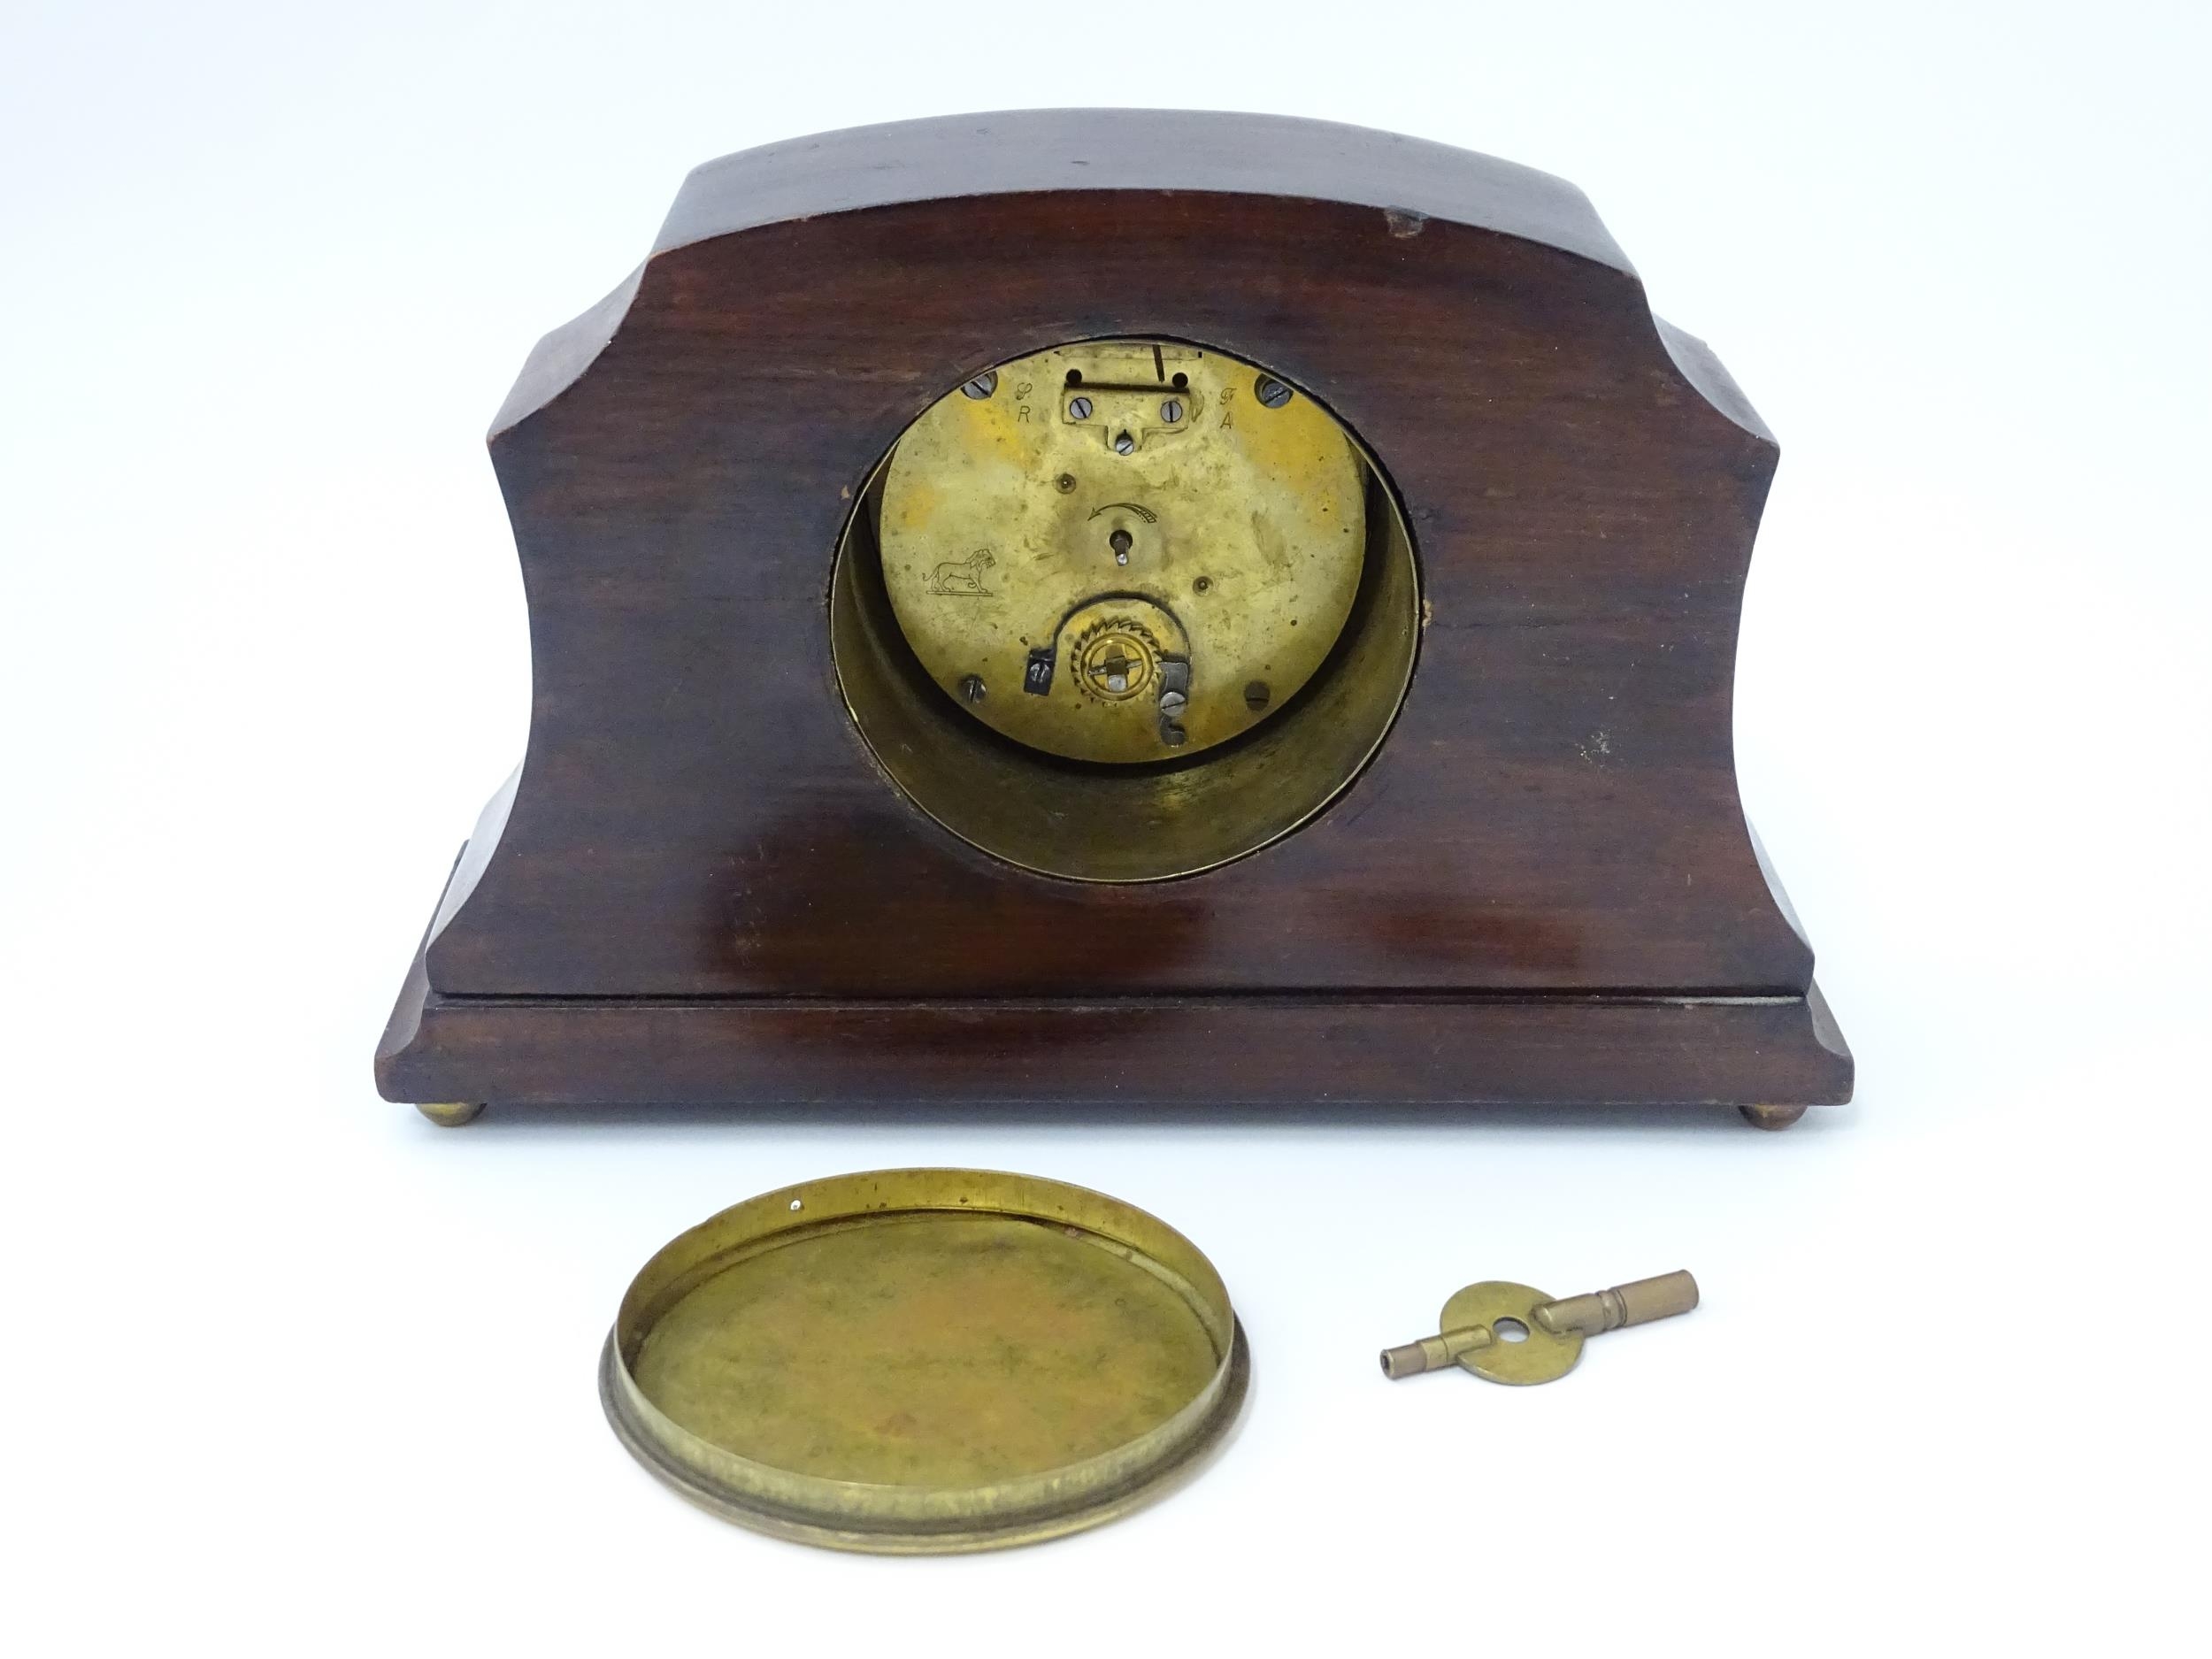 An early 20thC French mahogany cased mantle clock with white enamel dial and movement by - Image 5 of 6